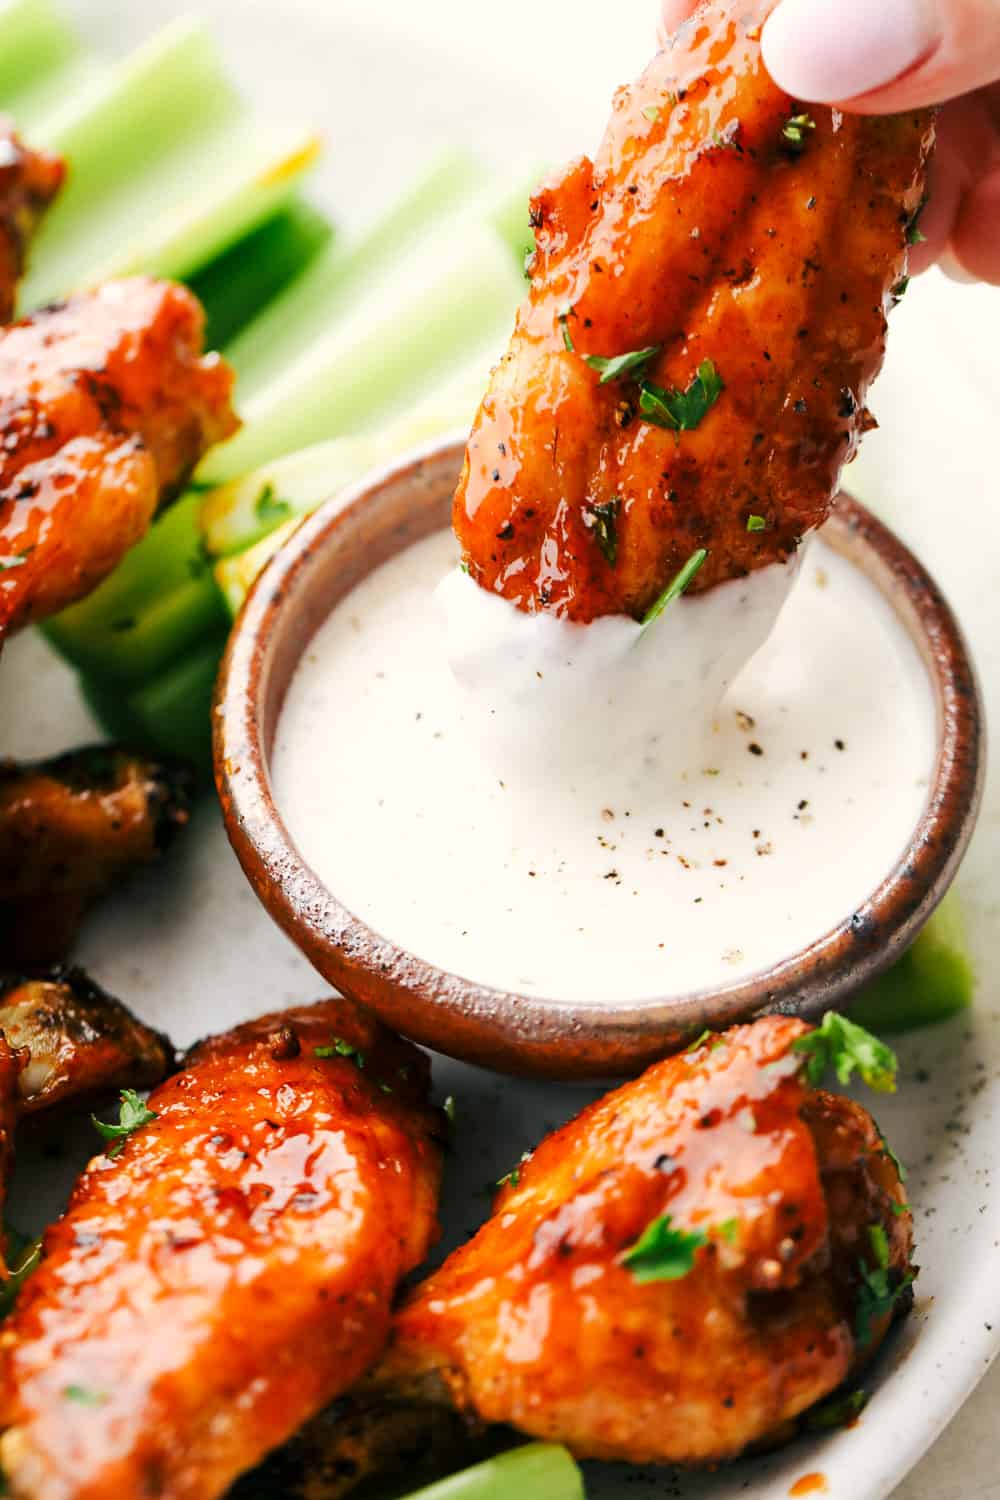 Dipping a chicken wing in ranch sauce.